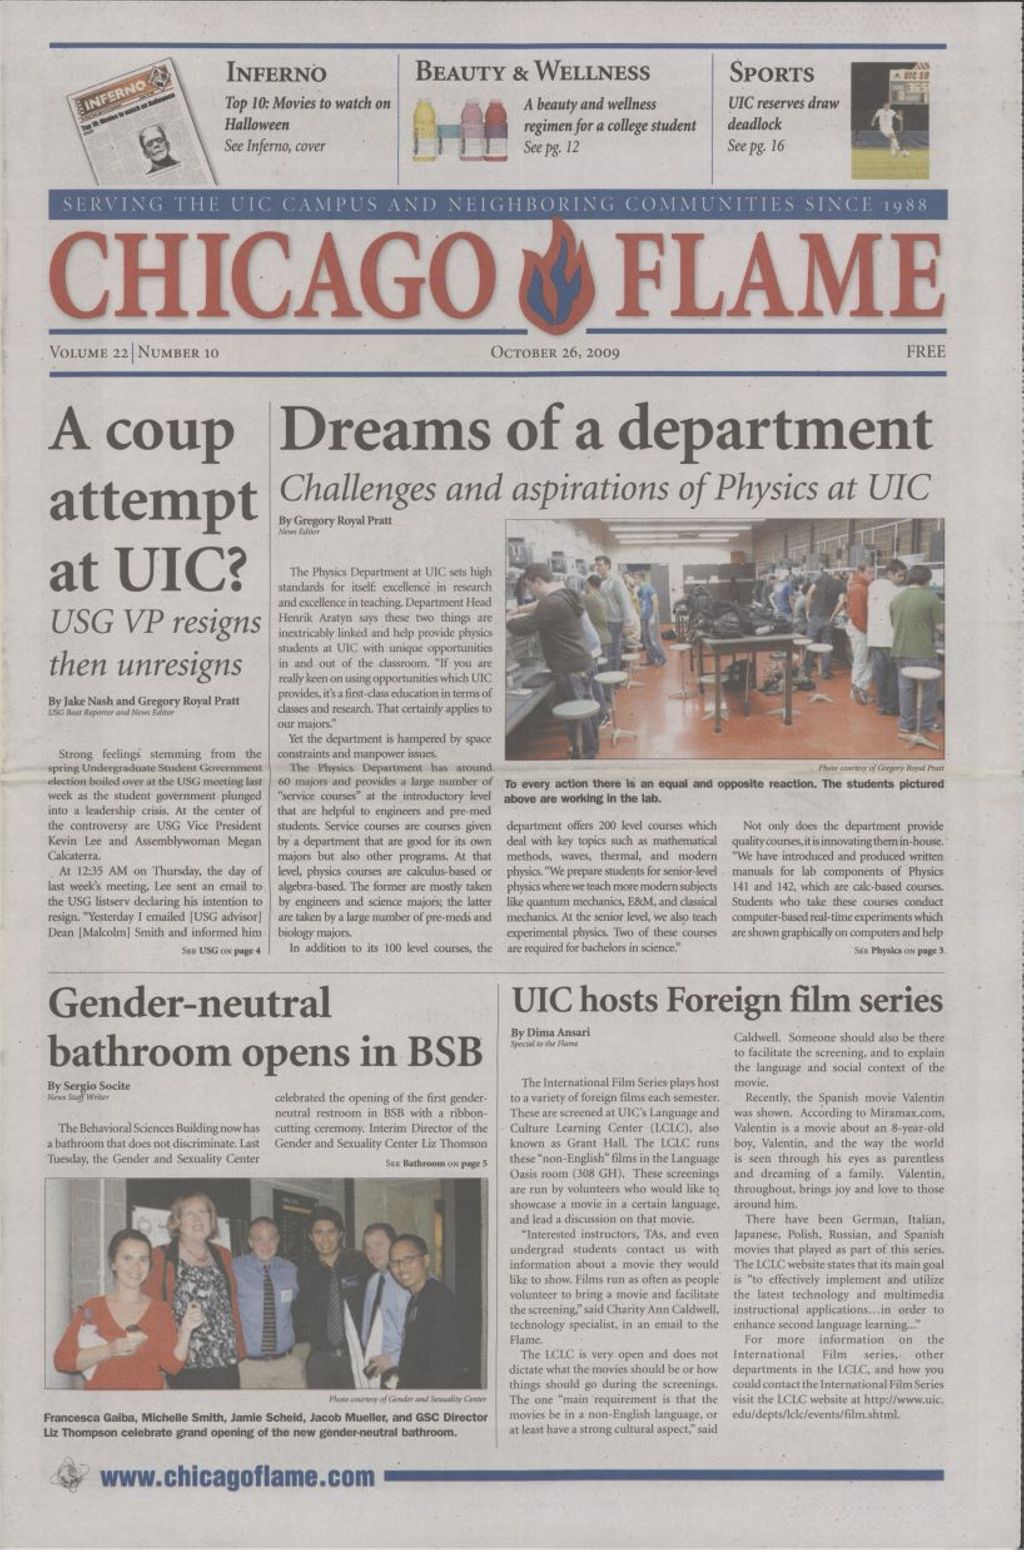 Chicago Flame (October 26, 2009)